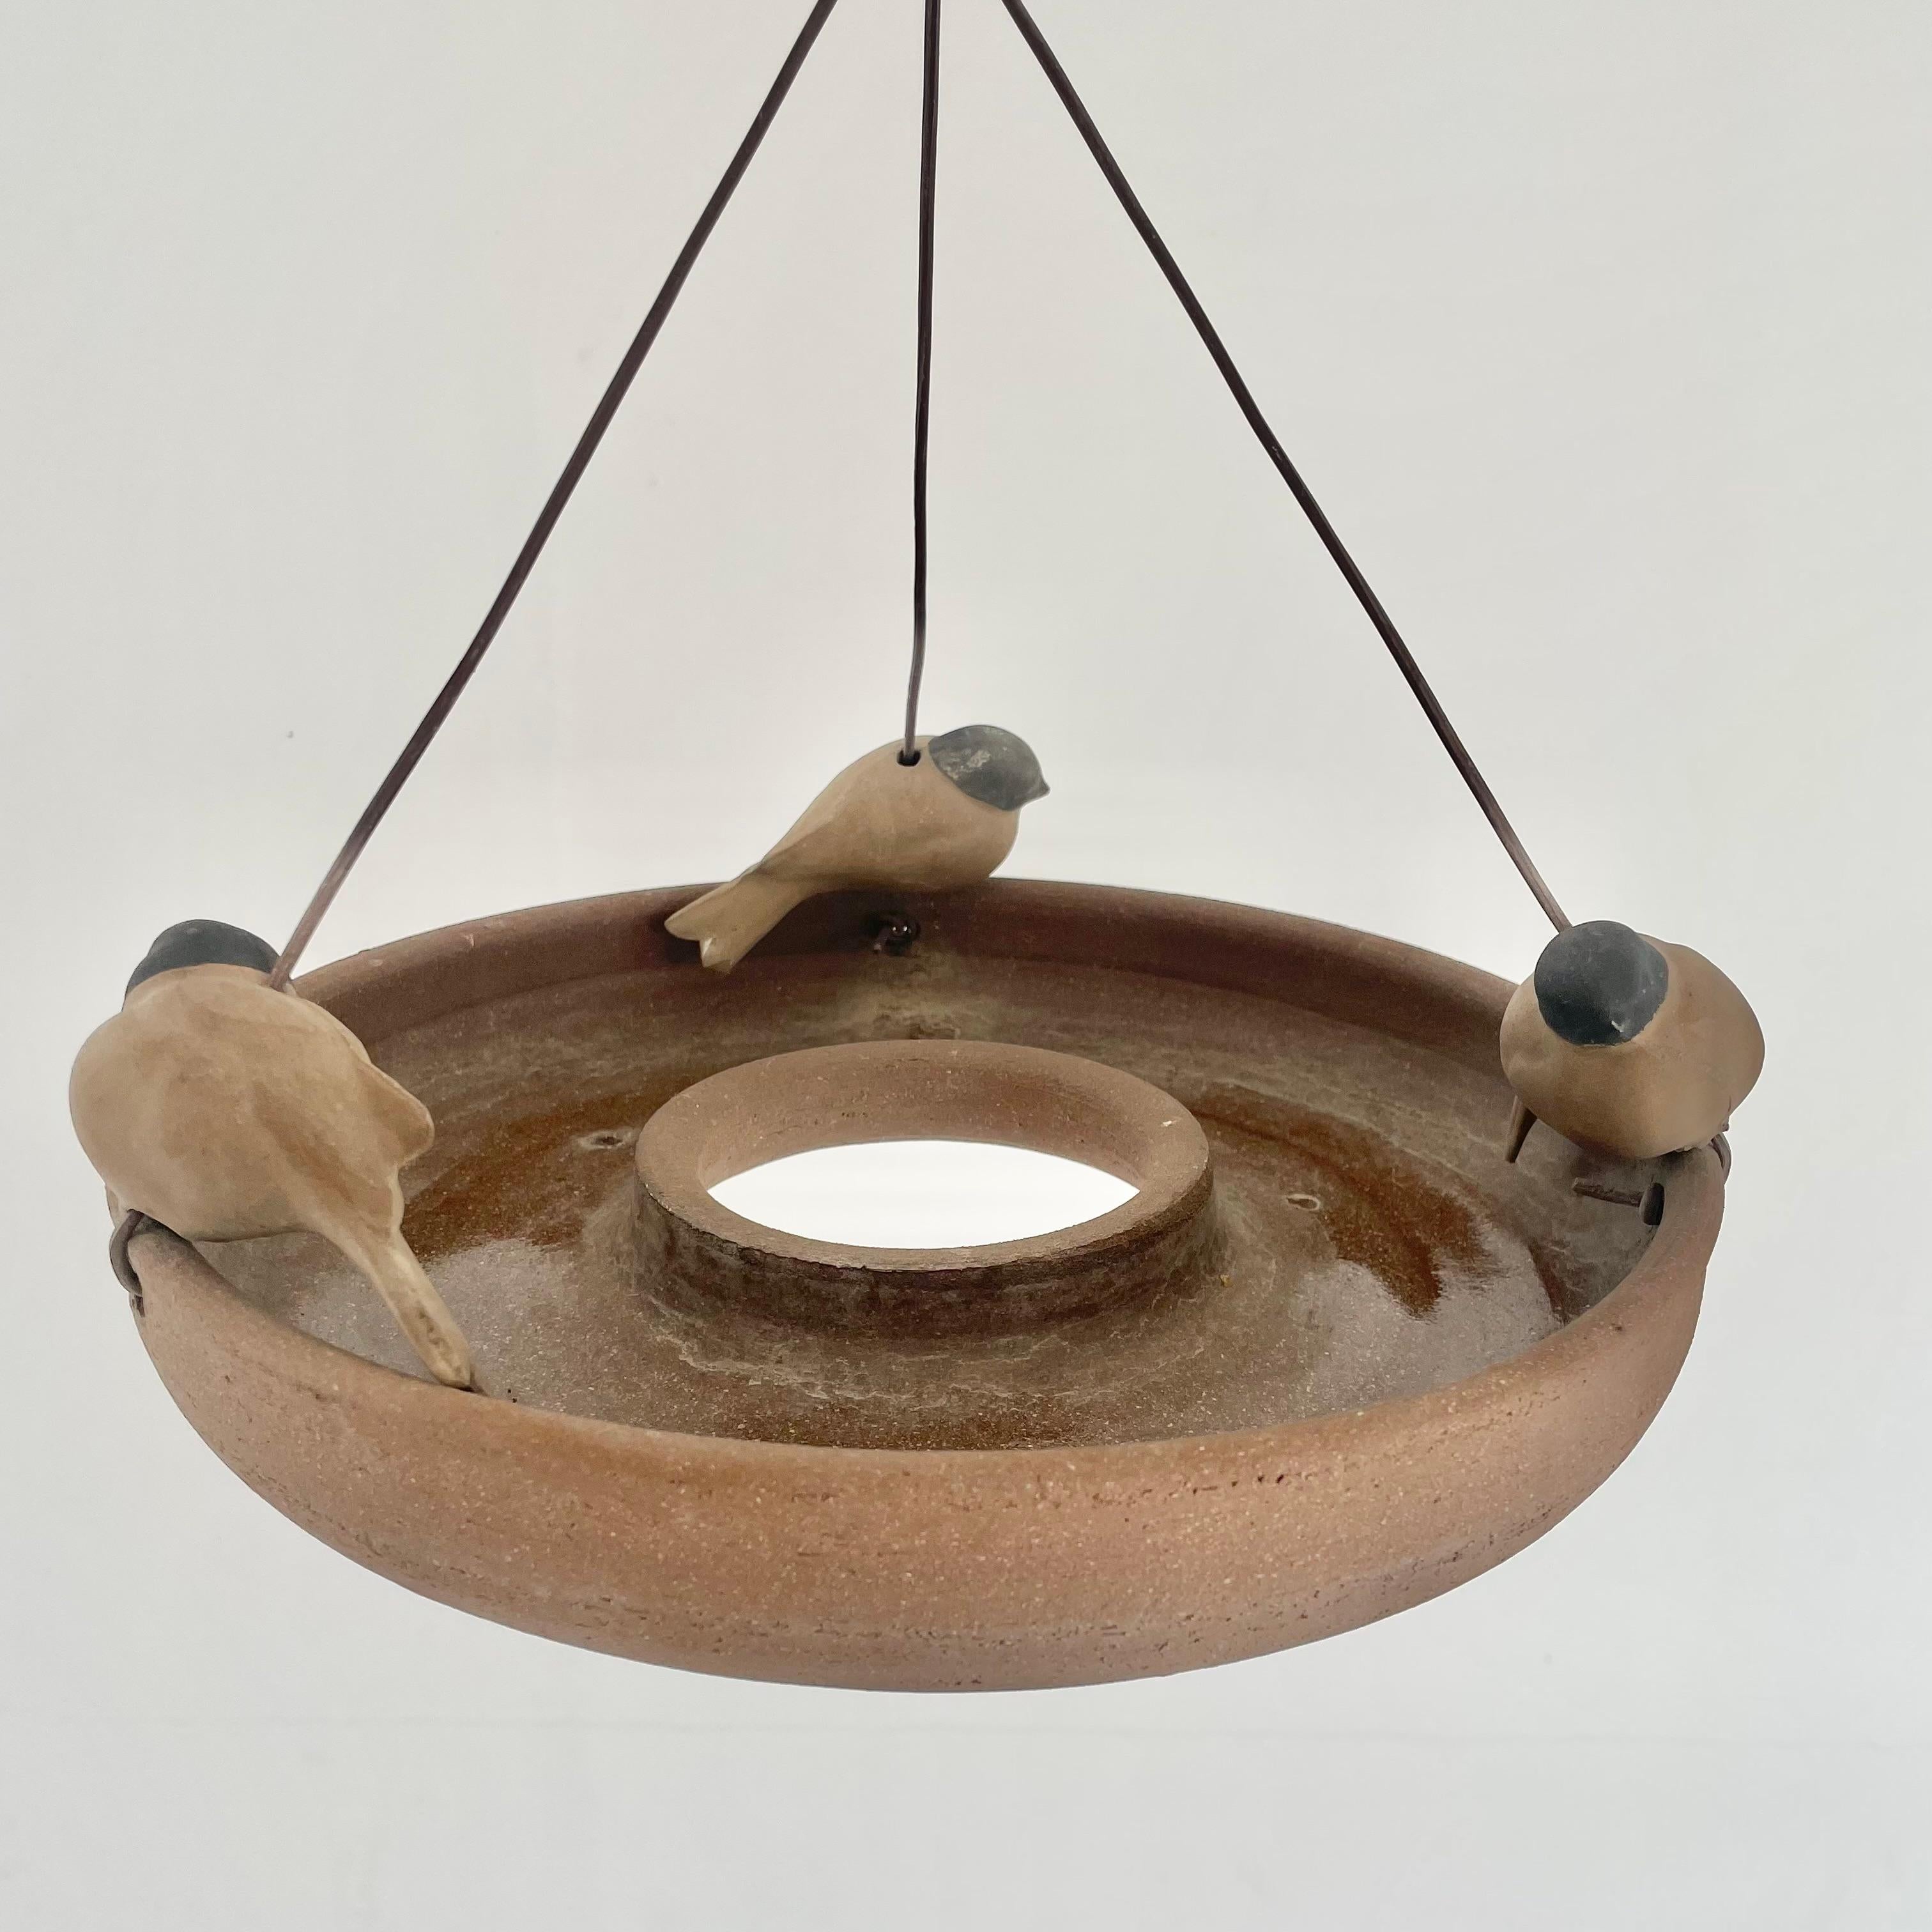 Beautiful hanging bird feeder by noted Californian ceramicist, Stan Bitters. Plastic cords are attached at three points on the dish and meet in a knot at the middle of the cords. Each plastic cord is adorned with a cast clay bird at their base.